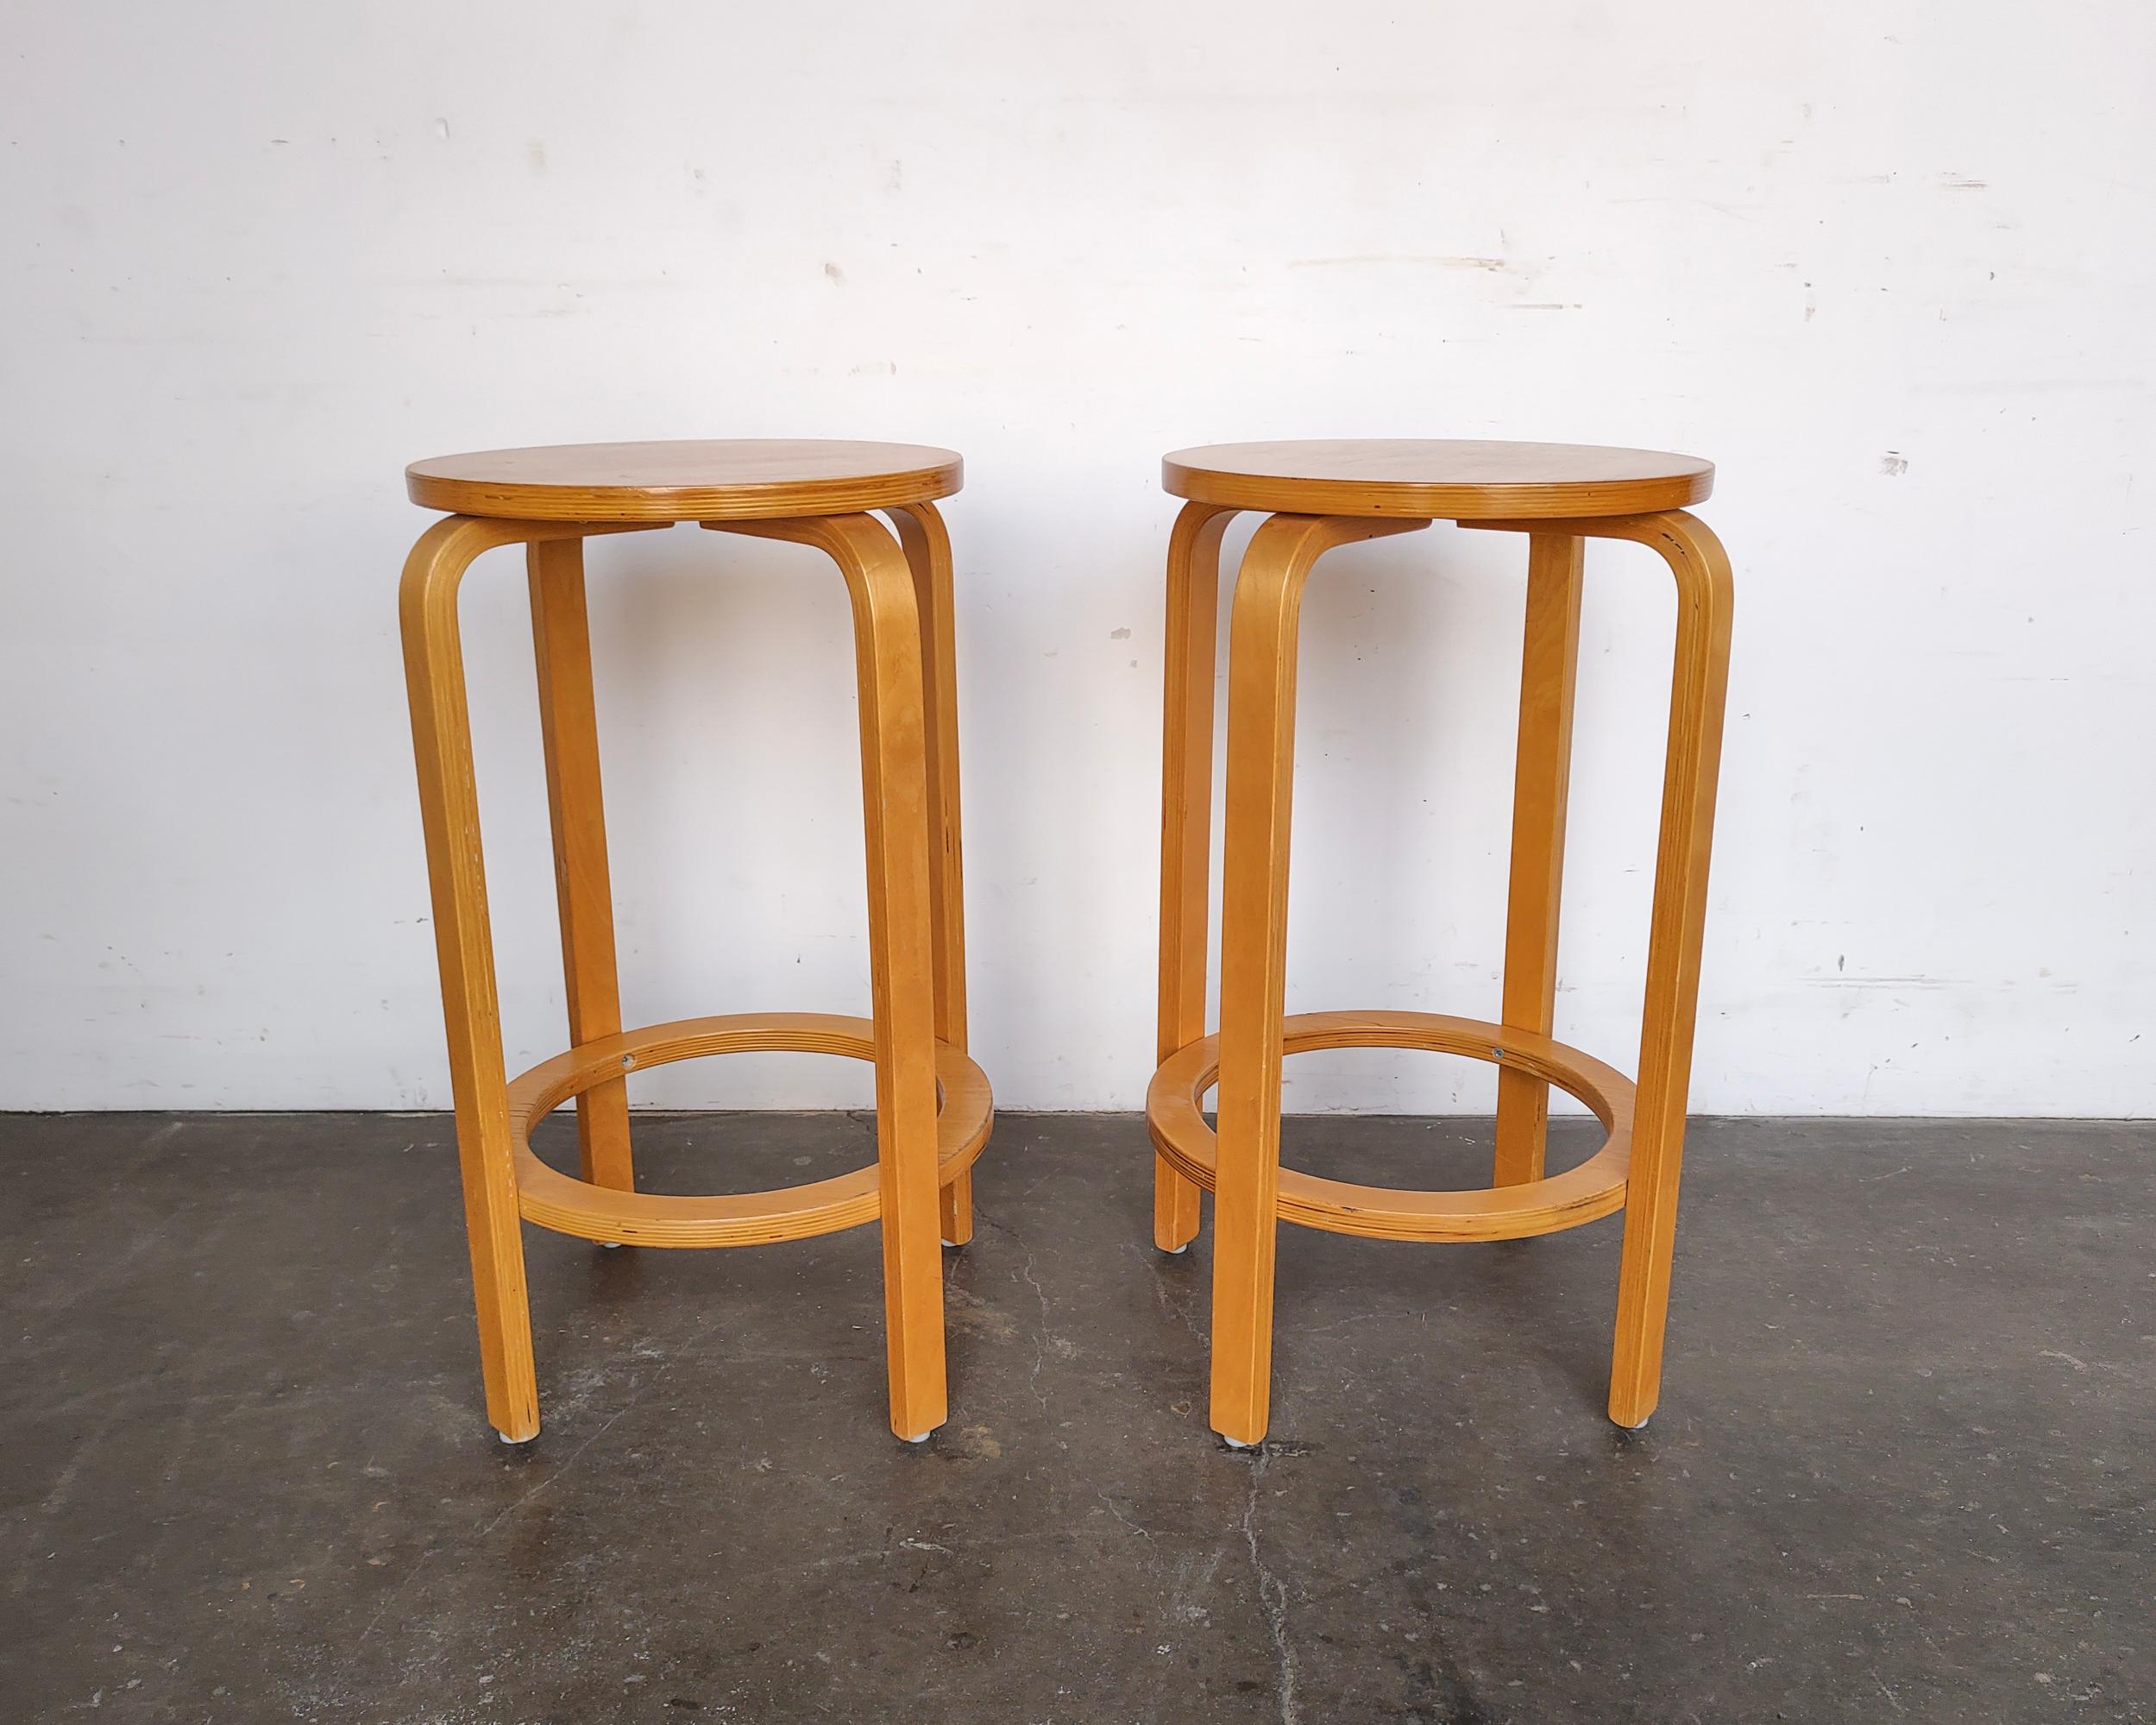 Pair of birch bentwood counter height stools in the style of early Alvar Aalto design. Overall great condition, some light wear to seats and a few areas of discoloration.

Measures: 13.75